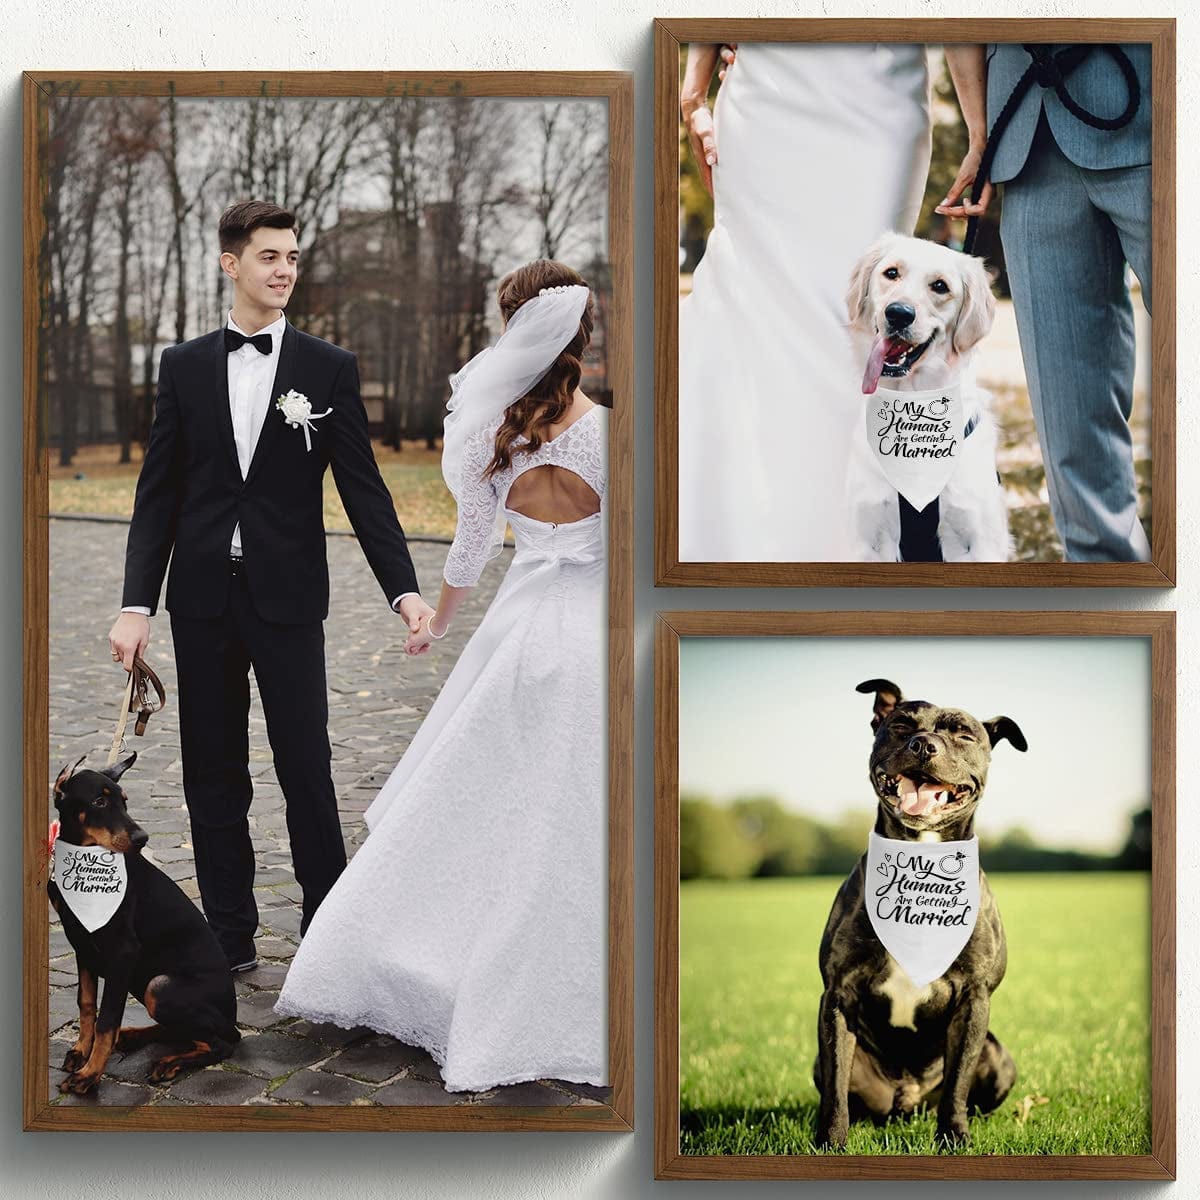 Engagement Gift, My Humans Are Getting Married Dog Bandana, Wedding Photo Prop, Pet Scarf, Dog Engagement Announcement, Pet Accessories (Black)